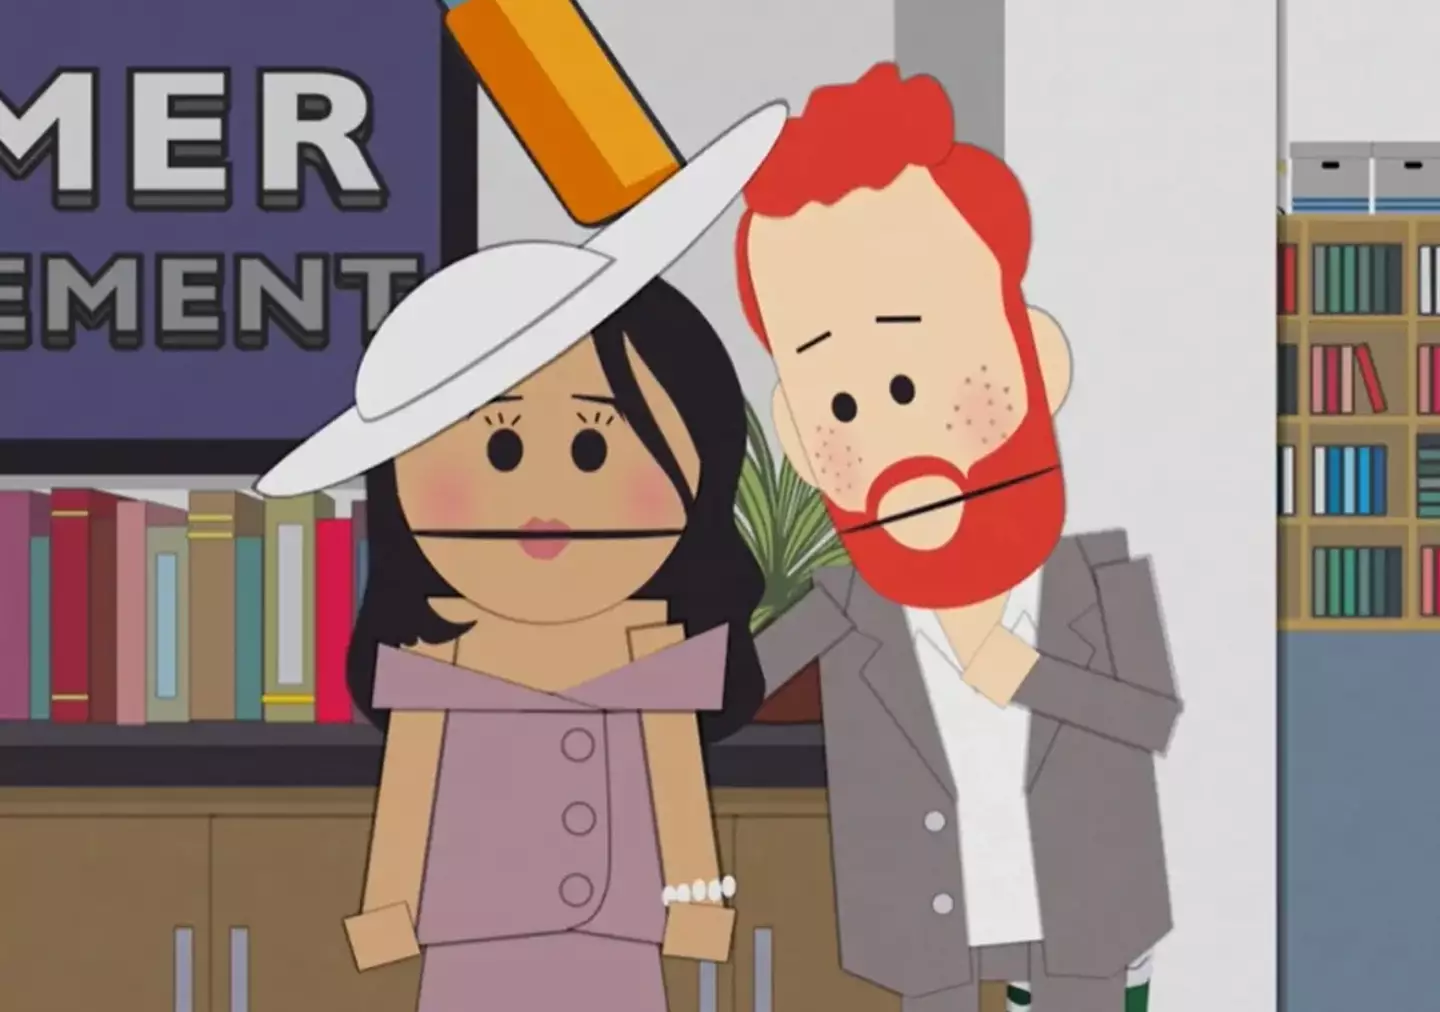 It was hard to miss the resemblance of the royals in South Park.